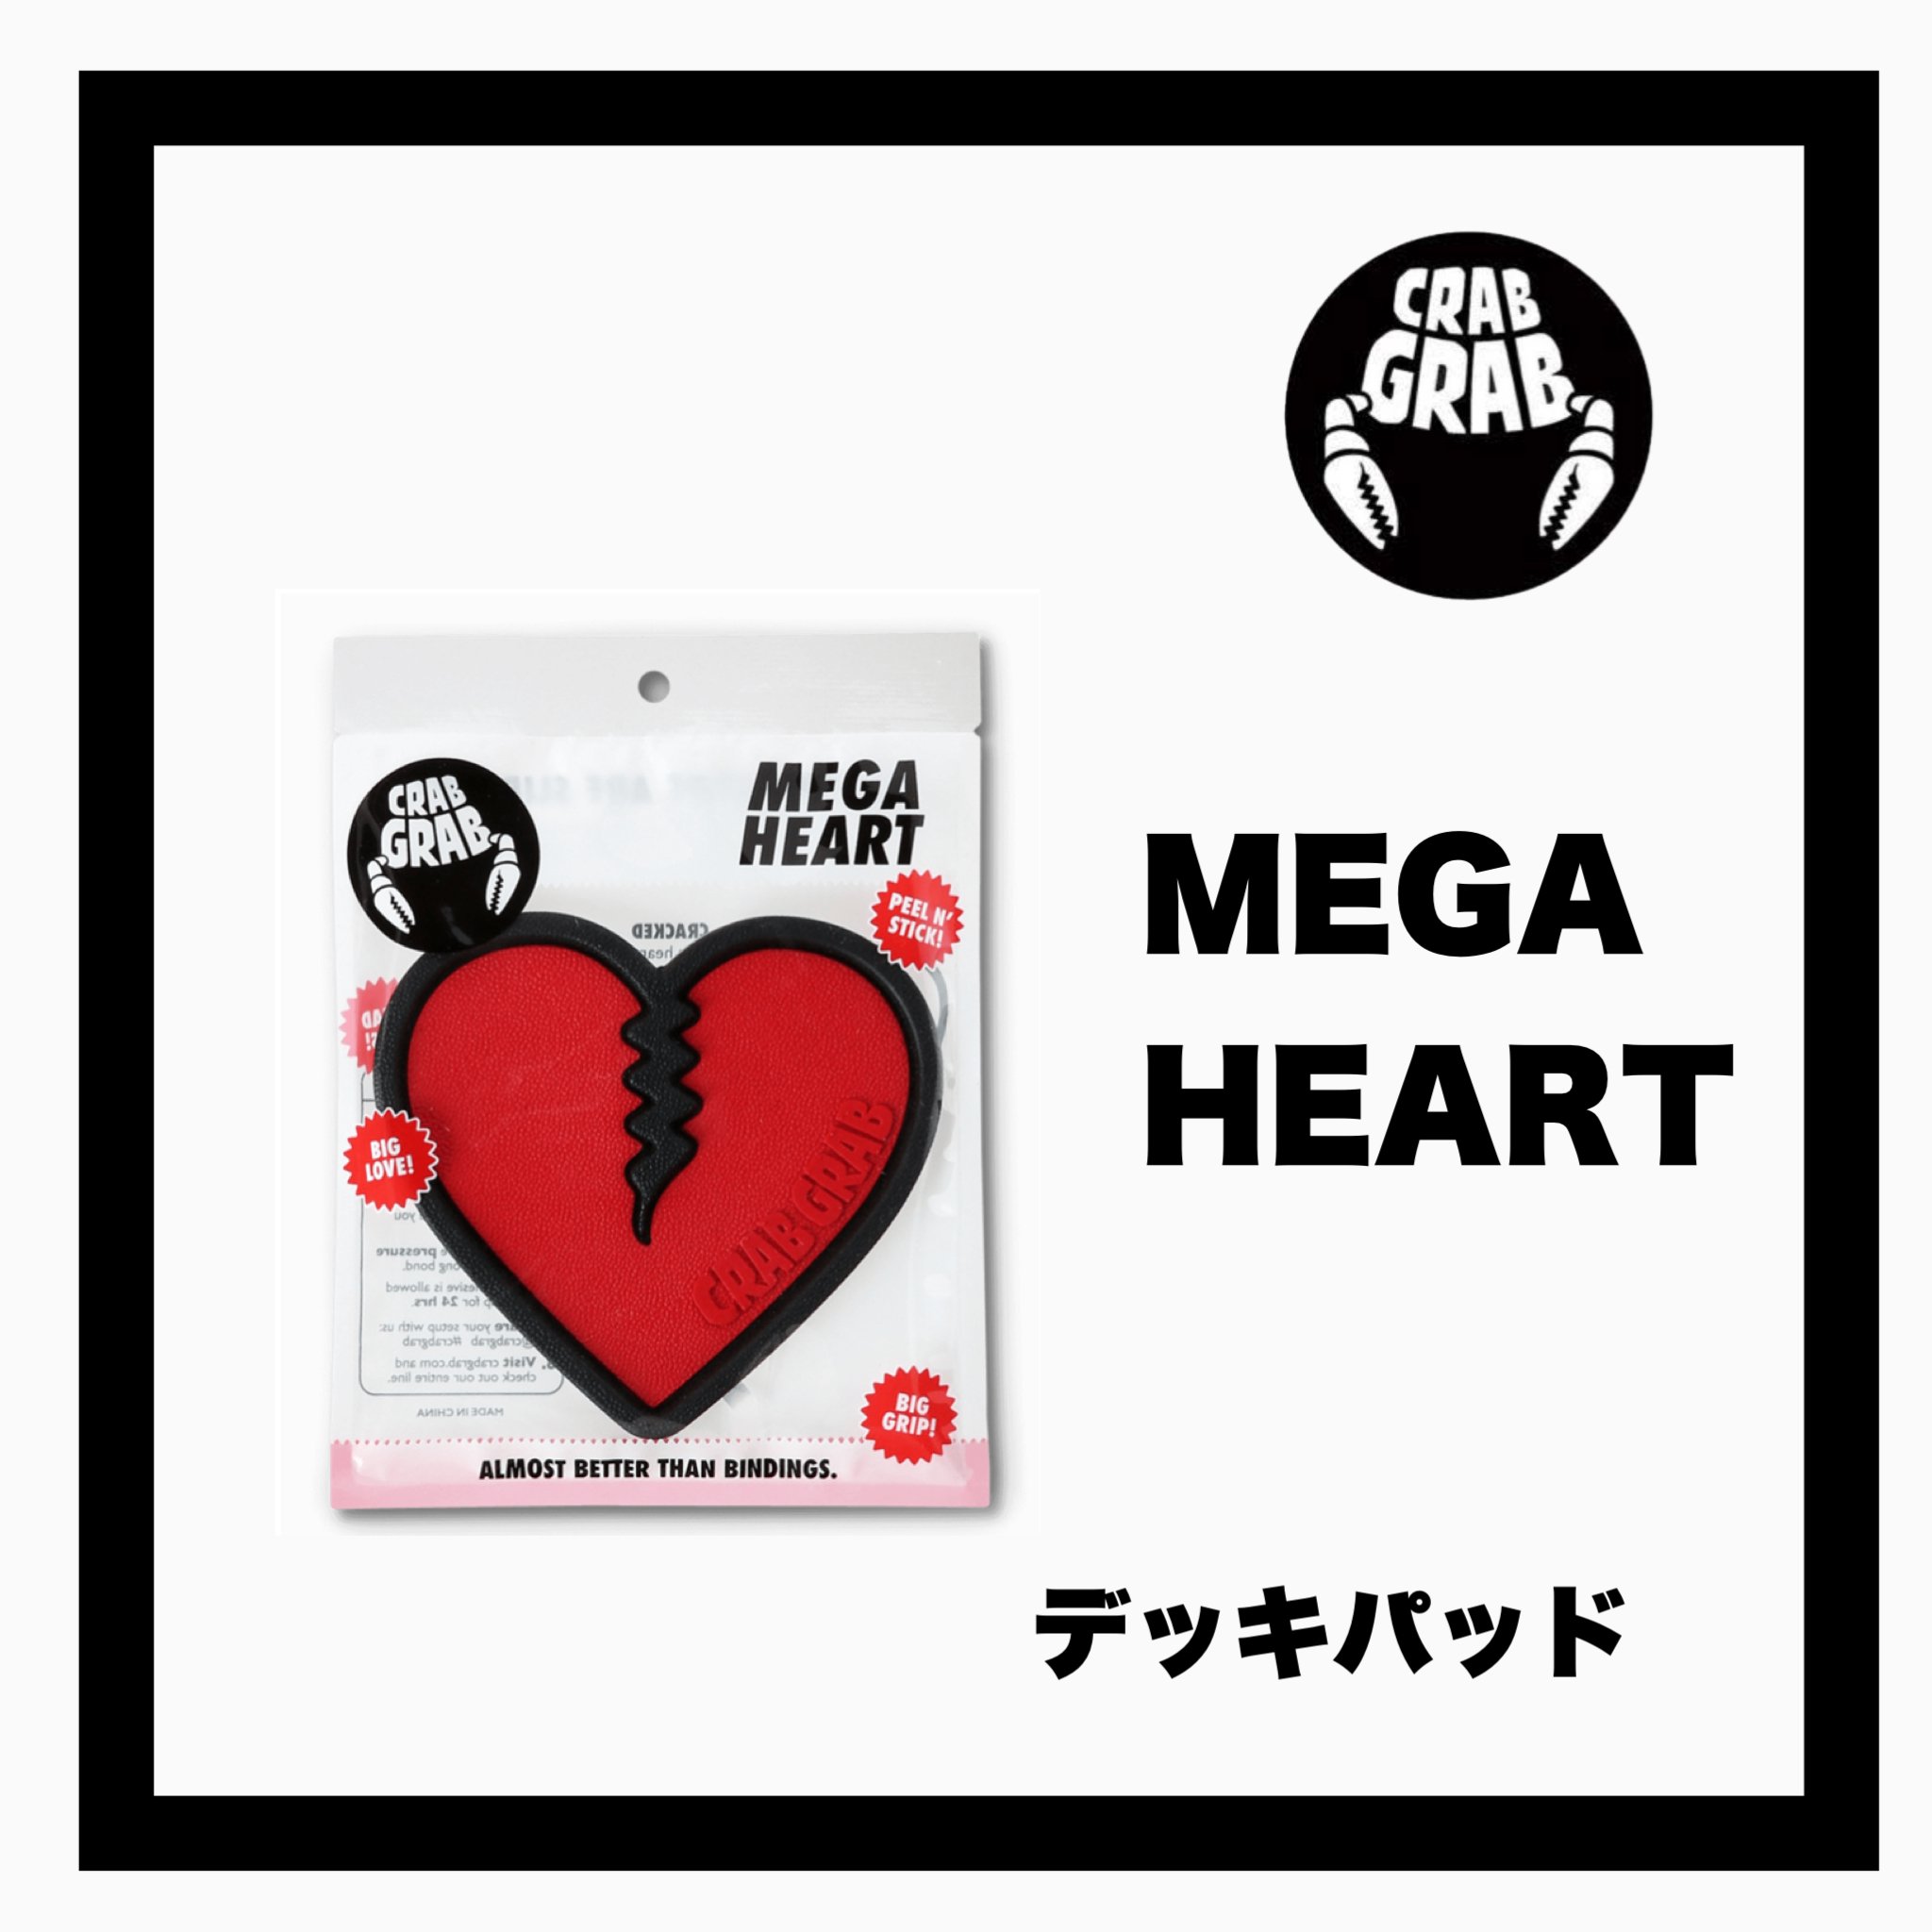 <img class='new_mark_img1' src='https://img.shop-pro.jp/img/new/icons14.gif' style='border:none;display:inline;margin:0px;padding:0px;width:auto;' />CRAB GRABMEGA HEART